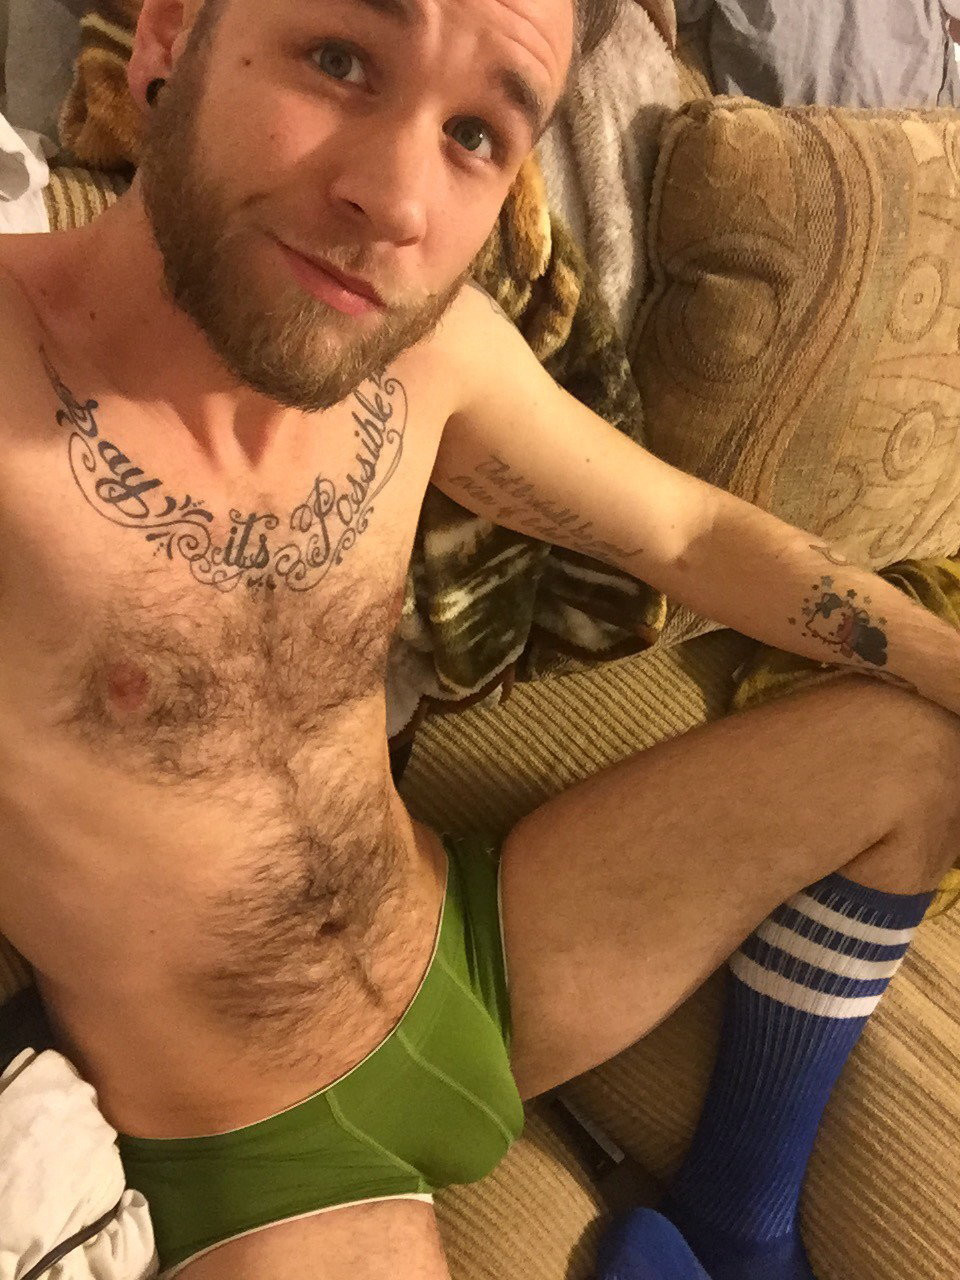 Watch the Photo by Smitty with the username @Resol702, posted on March 3, 2019. The post is about the topic Gay Hairy Men.